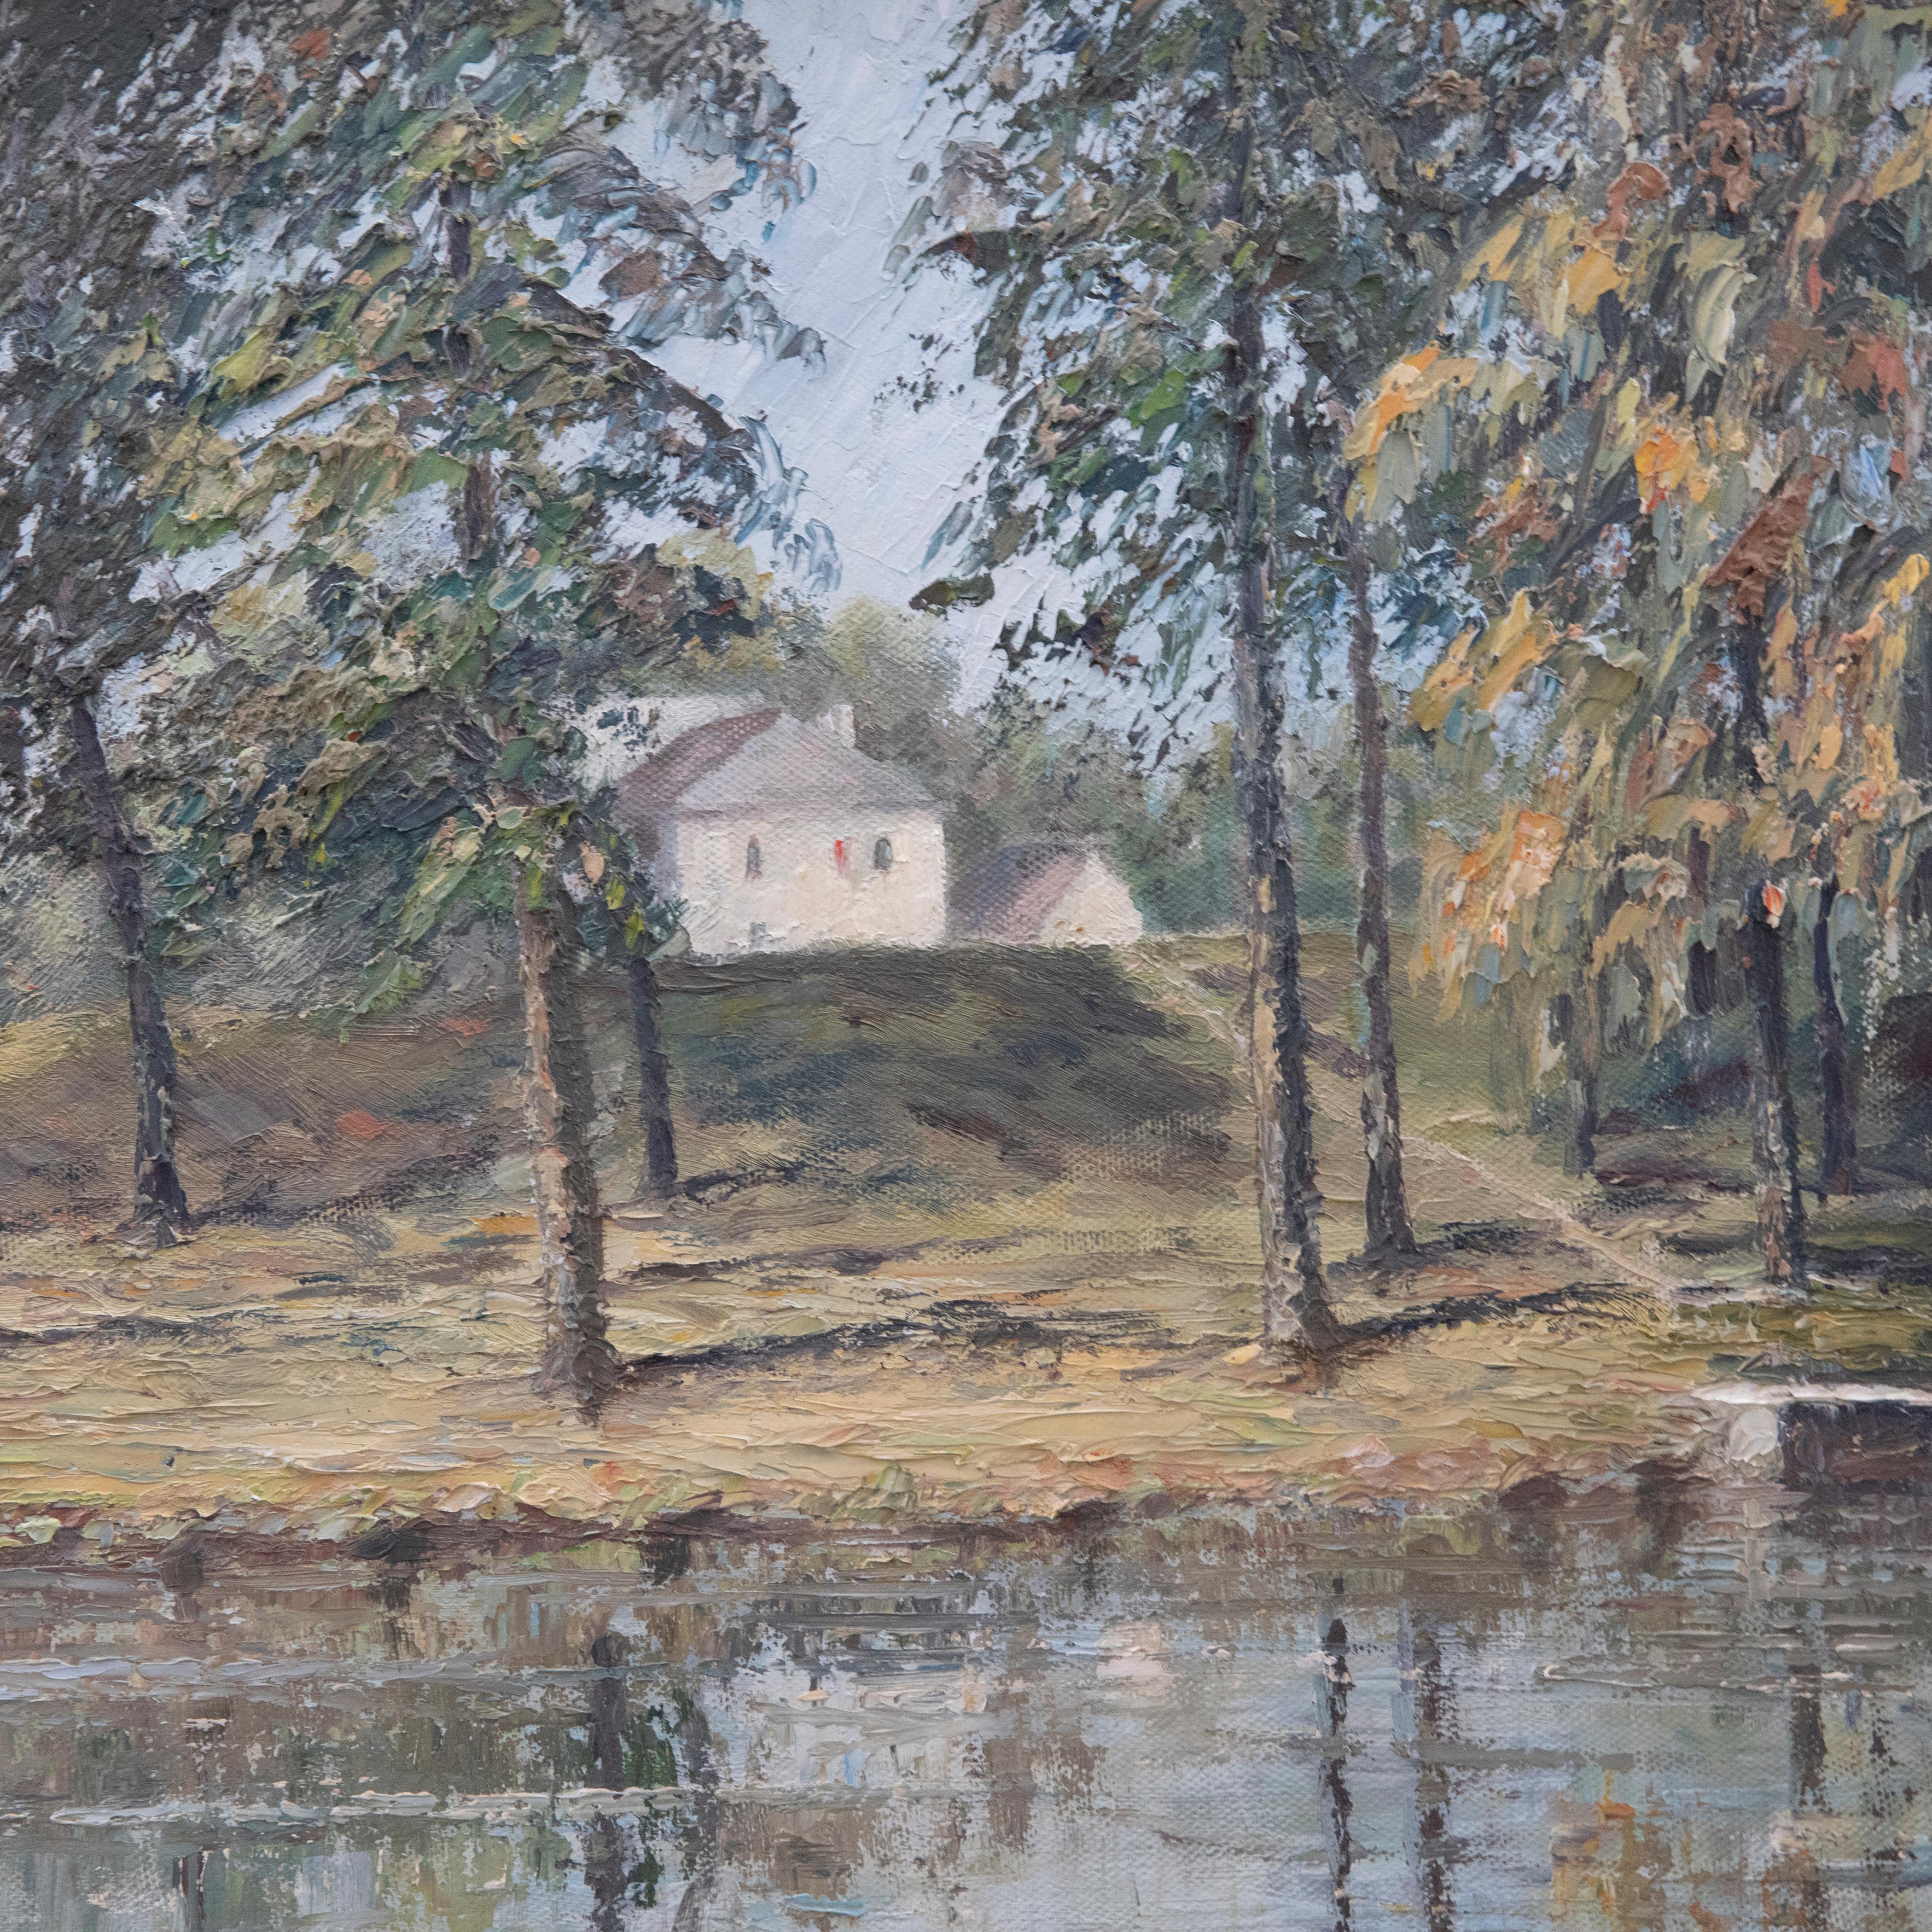 An impressionistic study of Harpenden ponds on the common by the 20th century artist Dorothy Ker Blows. Peeping over the grass bank, Dorothy has captured the large facade of a country house, viewed through summer trees. Well-presented in a